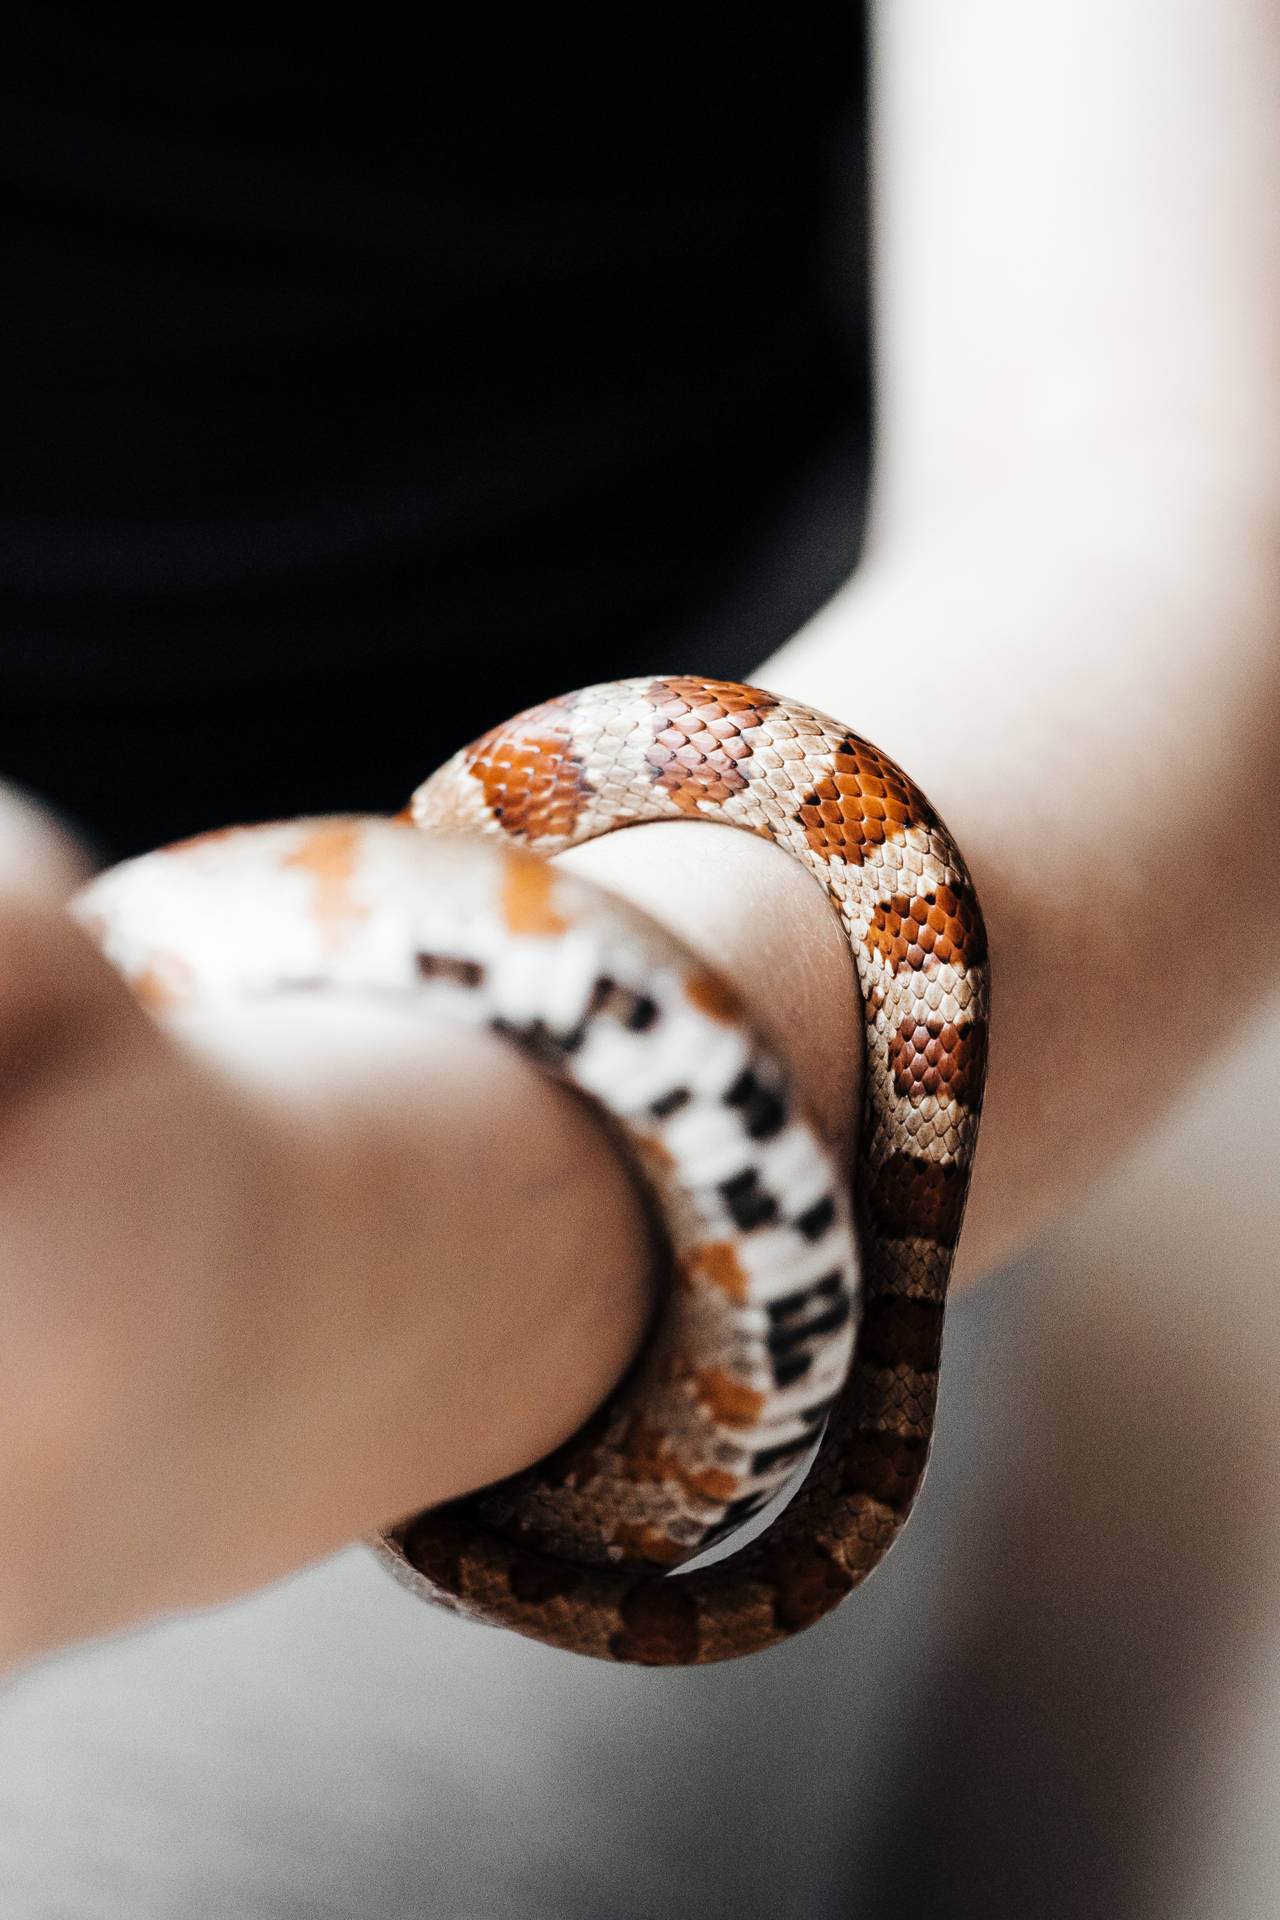 Snakes Wrapping Arm Awesome Animal